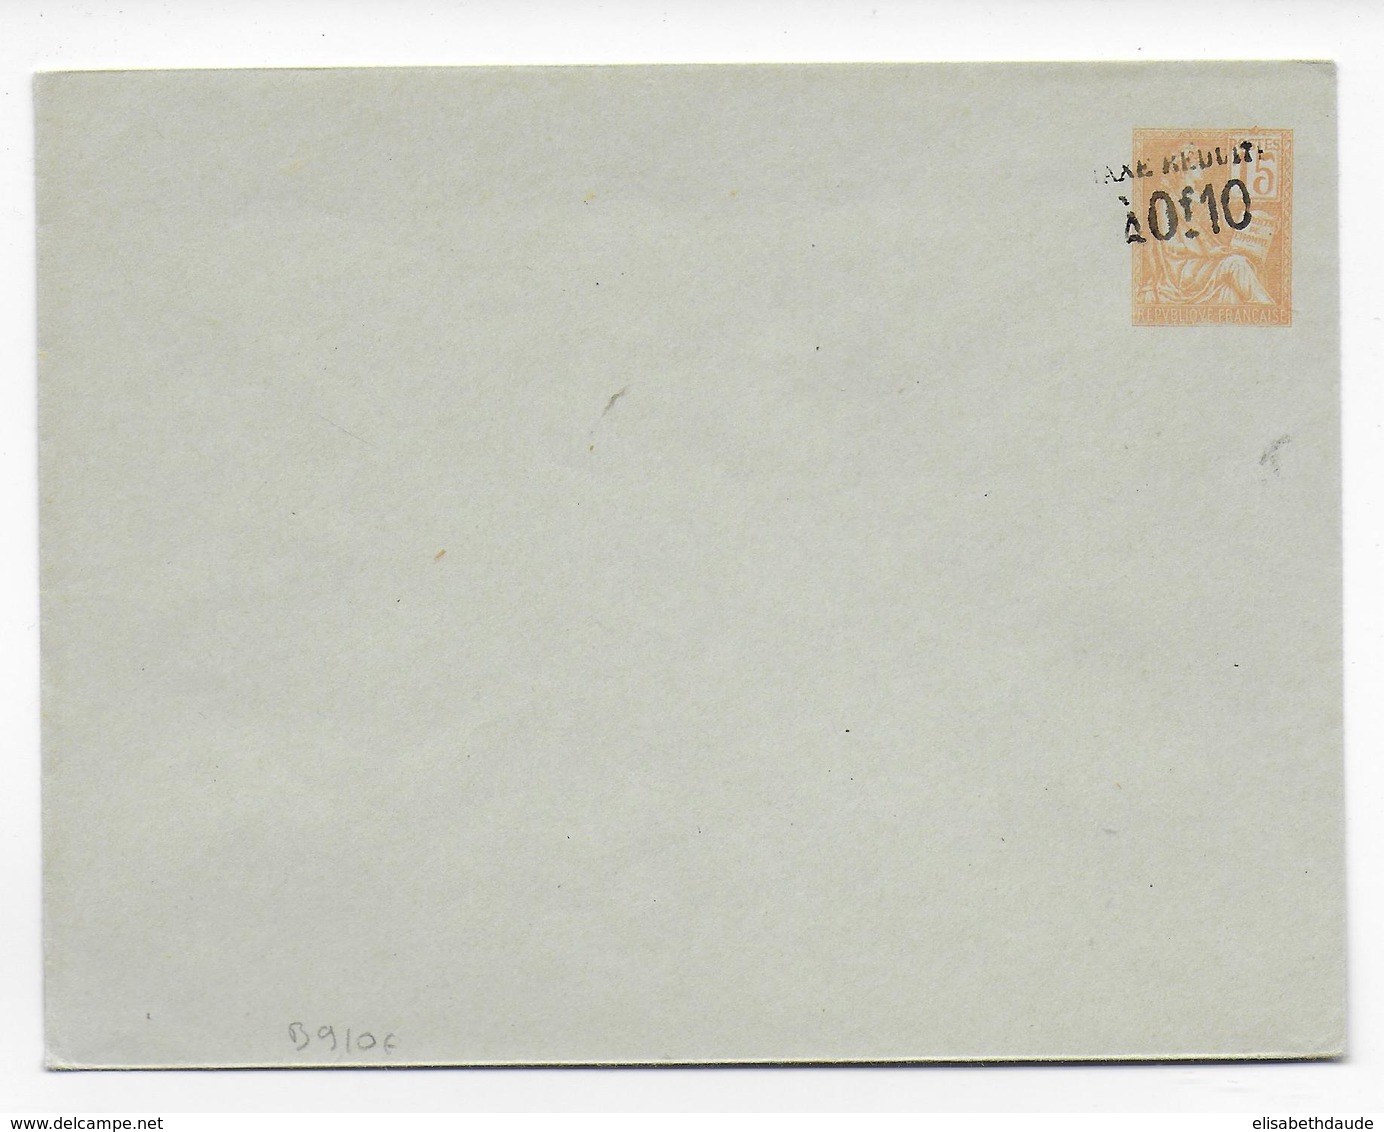 1901 - TYPE MOUCHON - ENVELOPPE ENTIER NEUVE 147X112 SURCHARGE De 1906 - STORCH B9 - DATE 106 - Standard Covers & Stamped On Demand (before 1995)